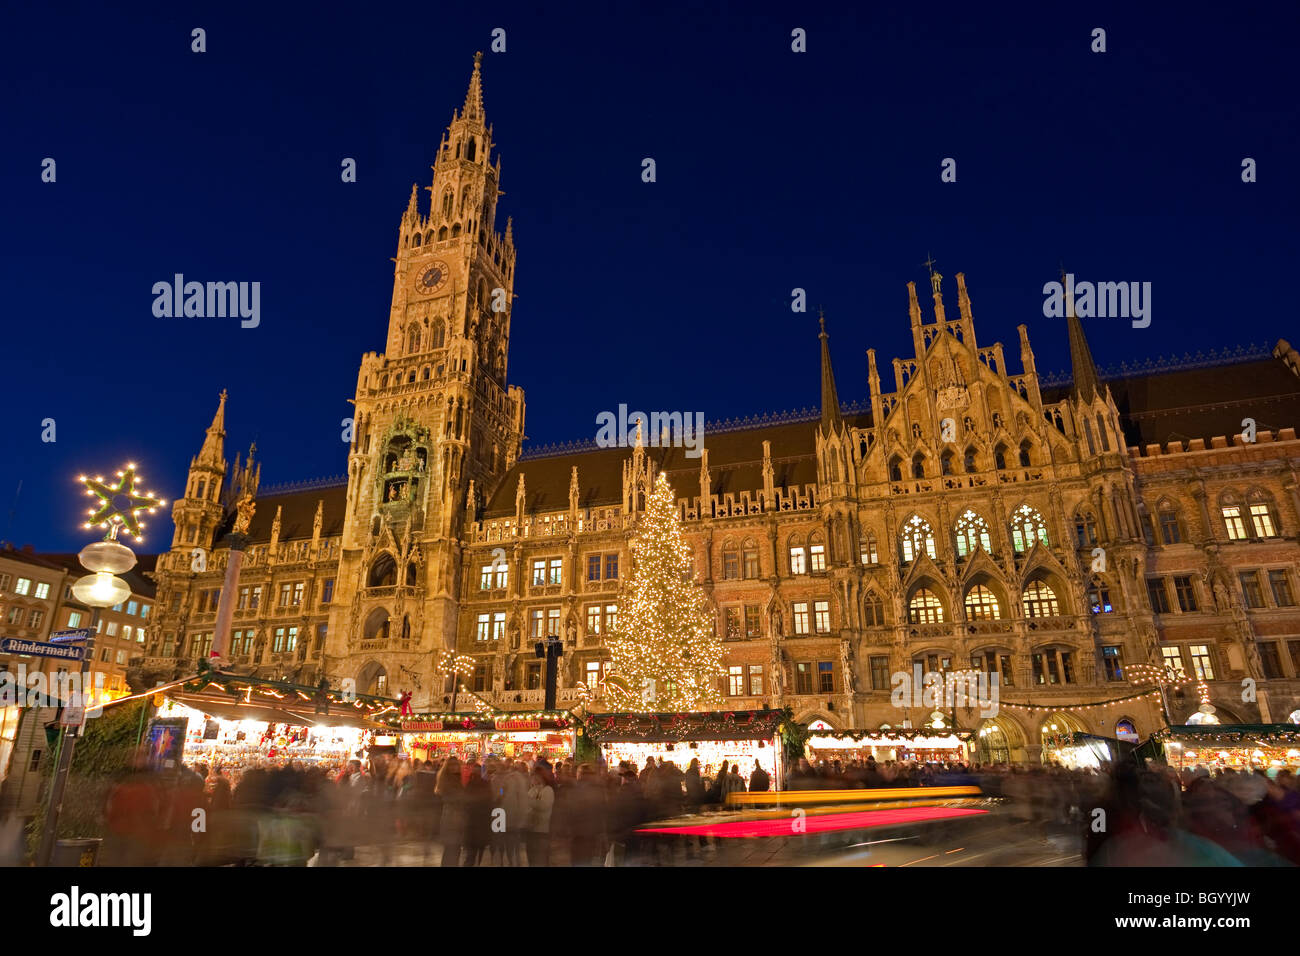 Christkindlmarkt (Christmas Markets) in the Marienplatz outside the Neues Rathaus (New City Hall) at dusk in the City of München Stock Photo